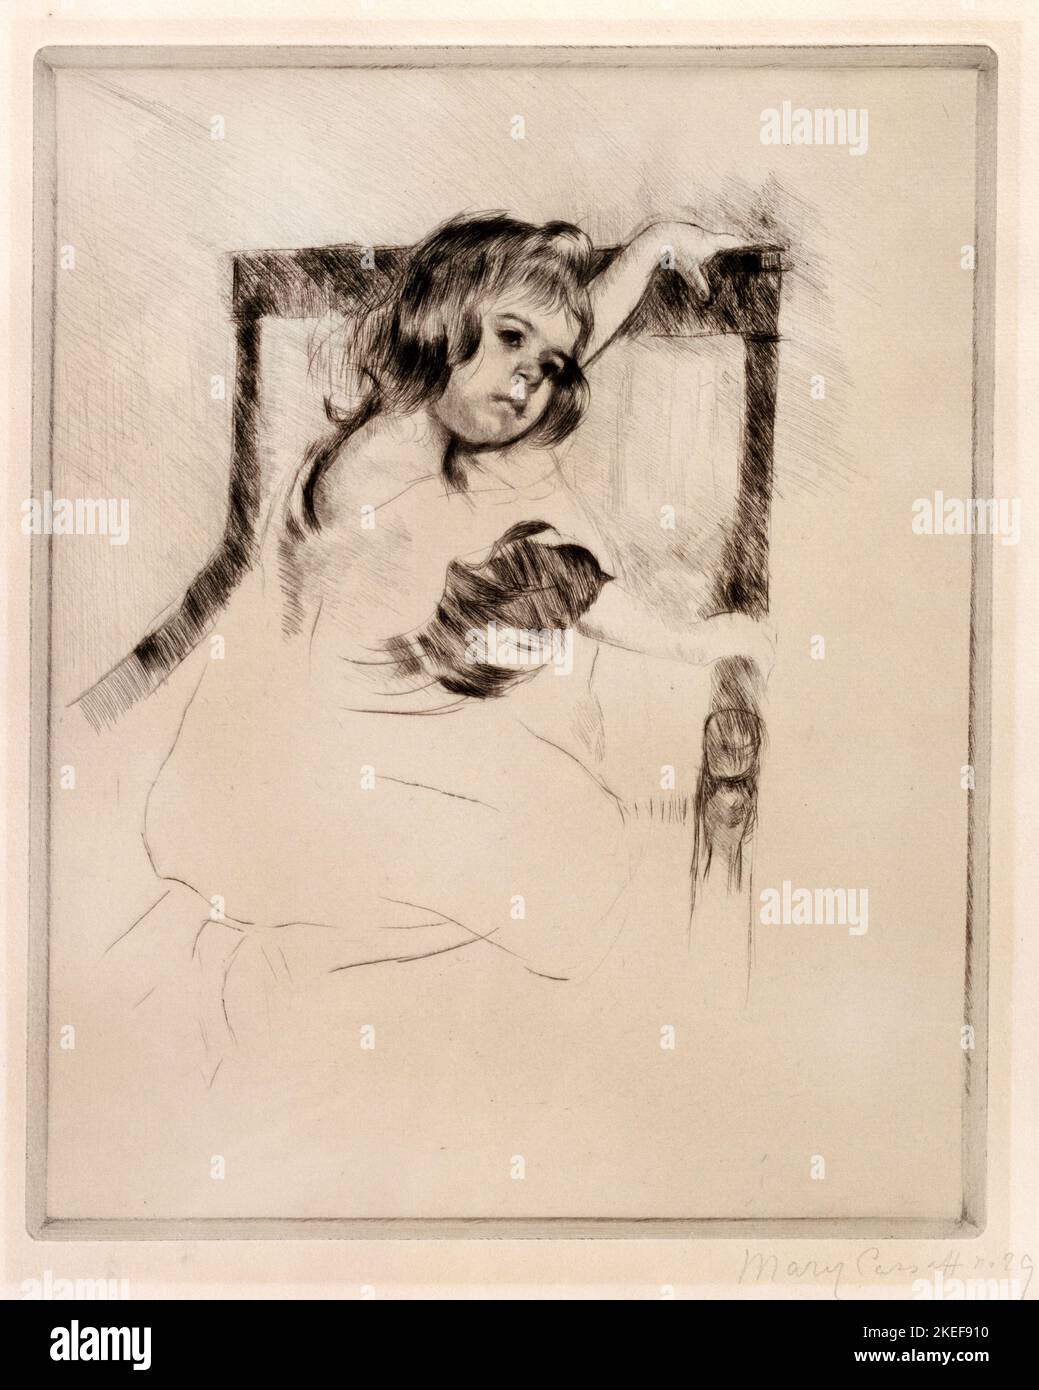 Mary Cassatt, Kneeling in an Armchair, Circa 1903, Drypoint on paper, Nelson-Atkins Museum of Art, USA Stock Photo